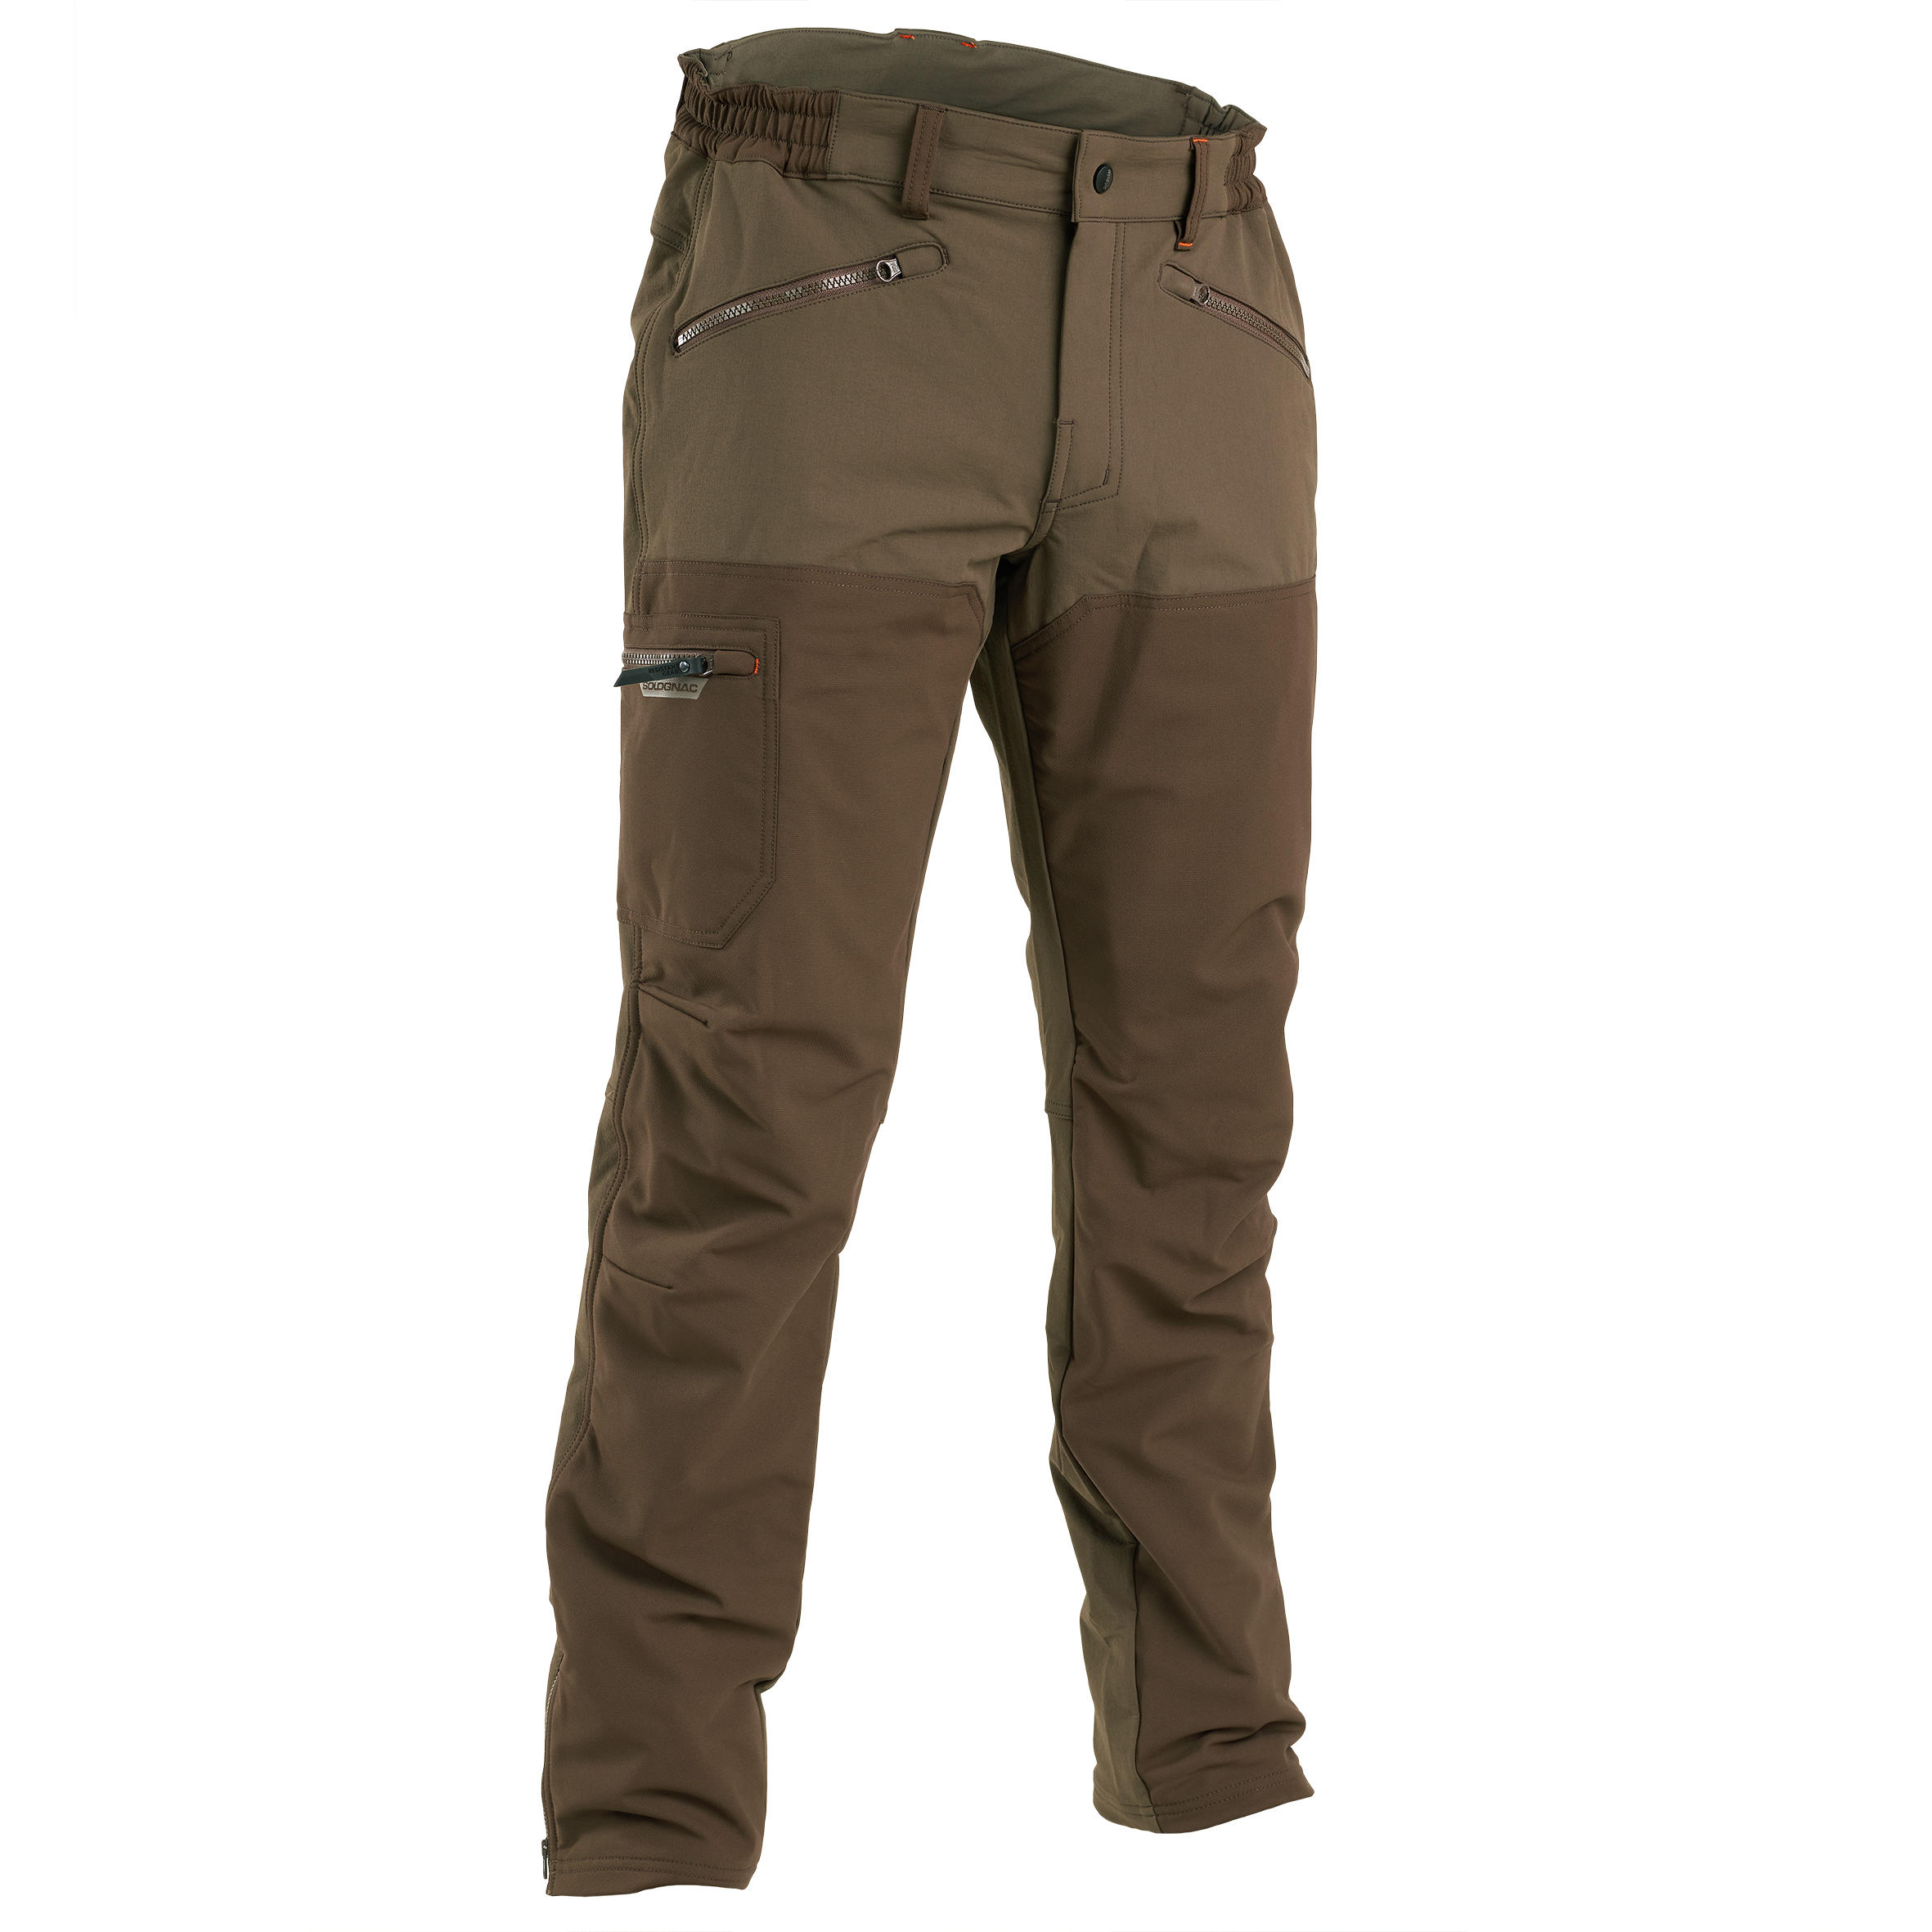 DECATHLON CARGO TROUSERS With Zip Off Legs Size Eur 42 799  PicClick UK